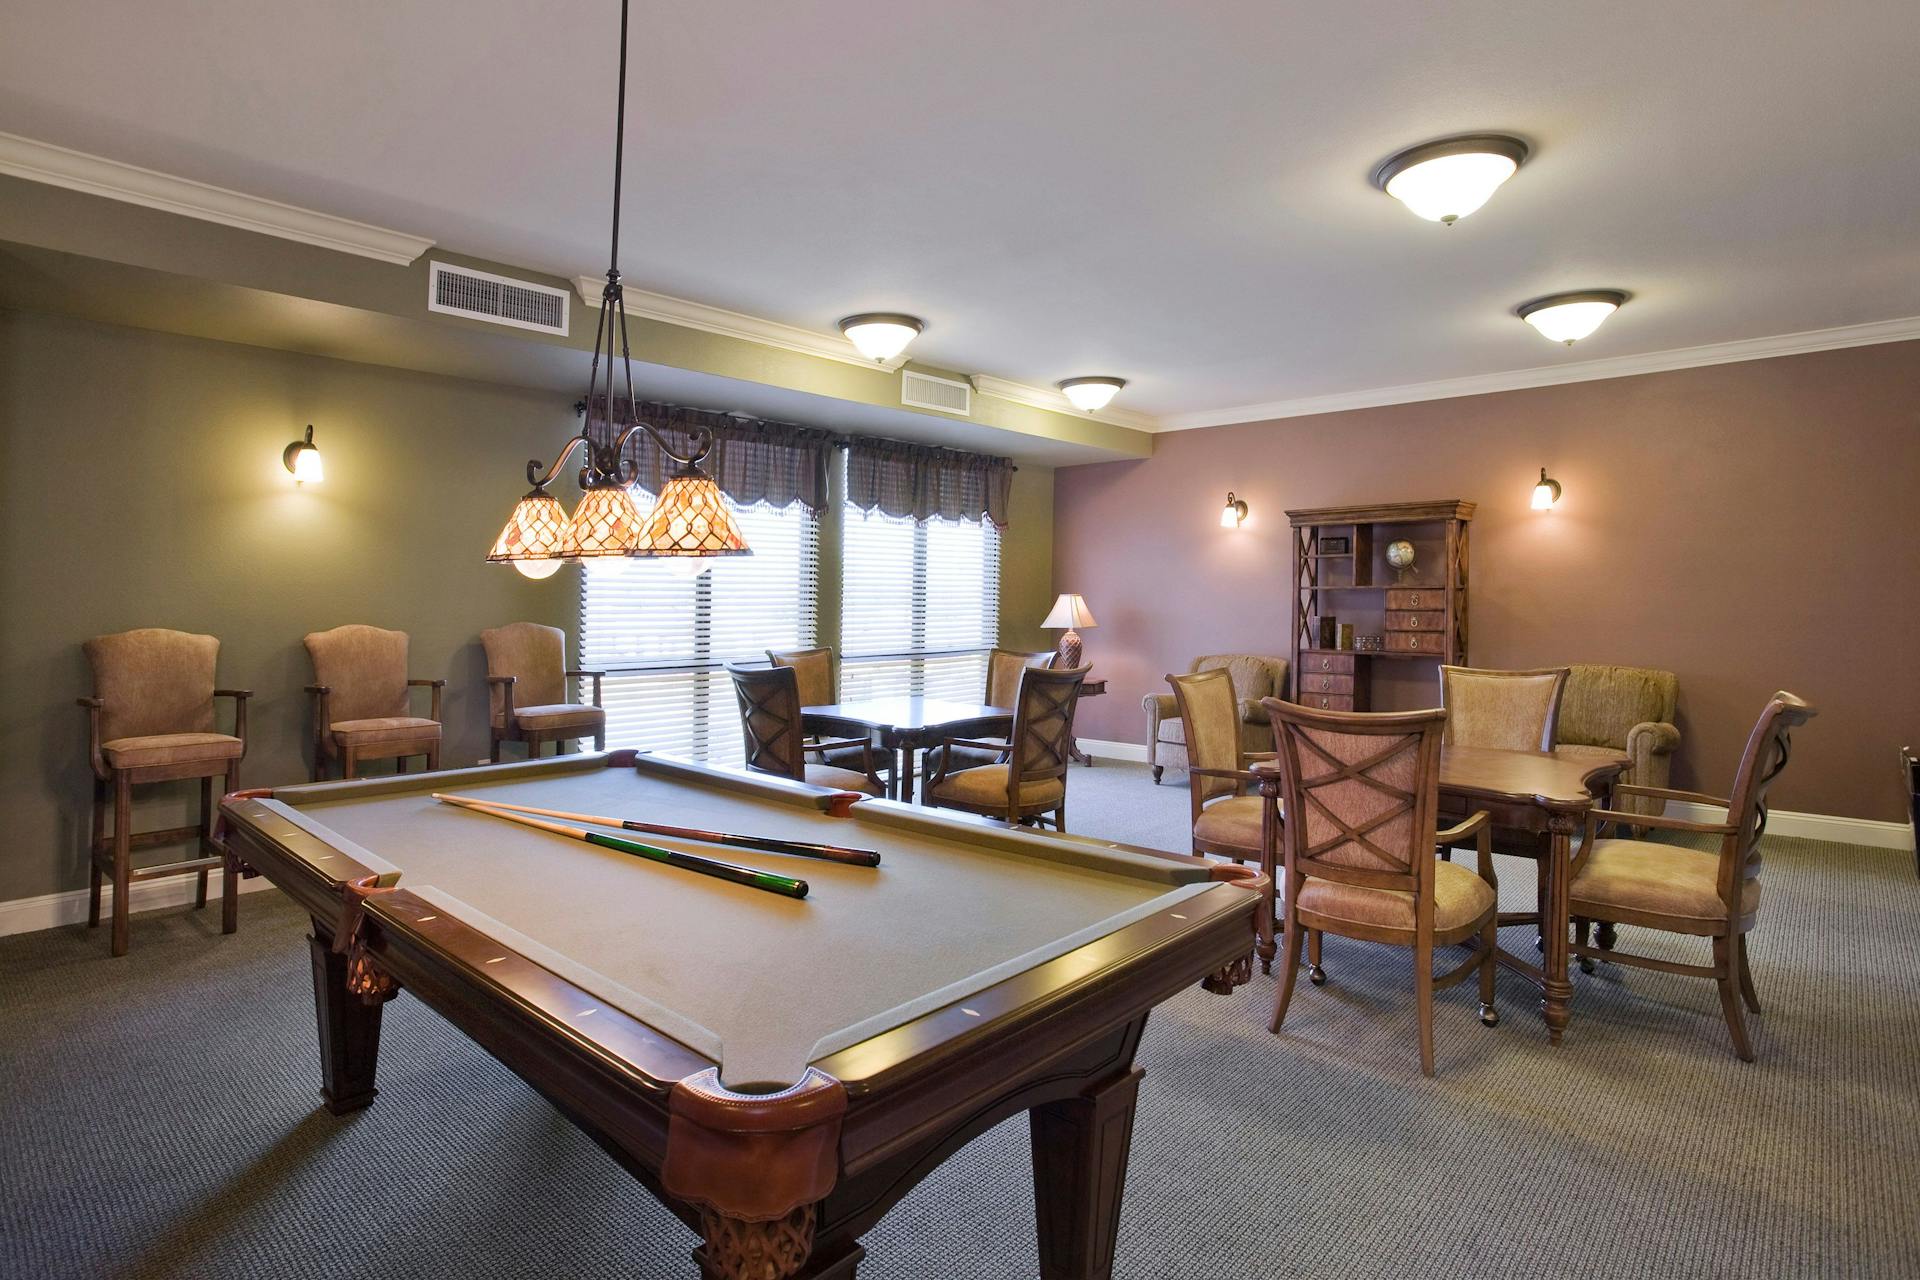 Community room with pool table